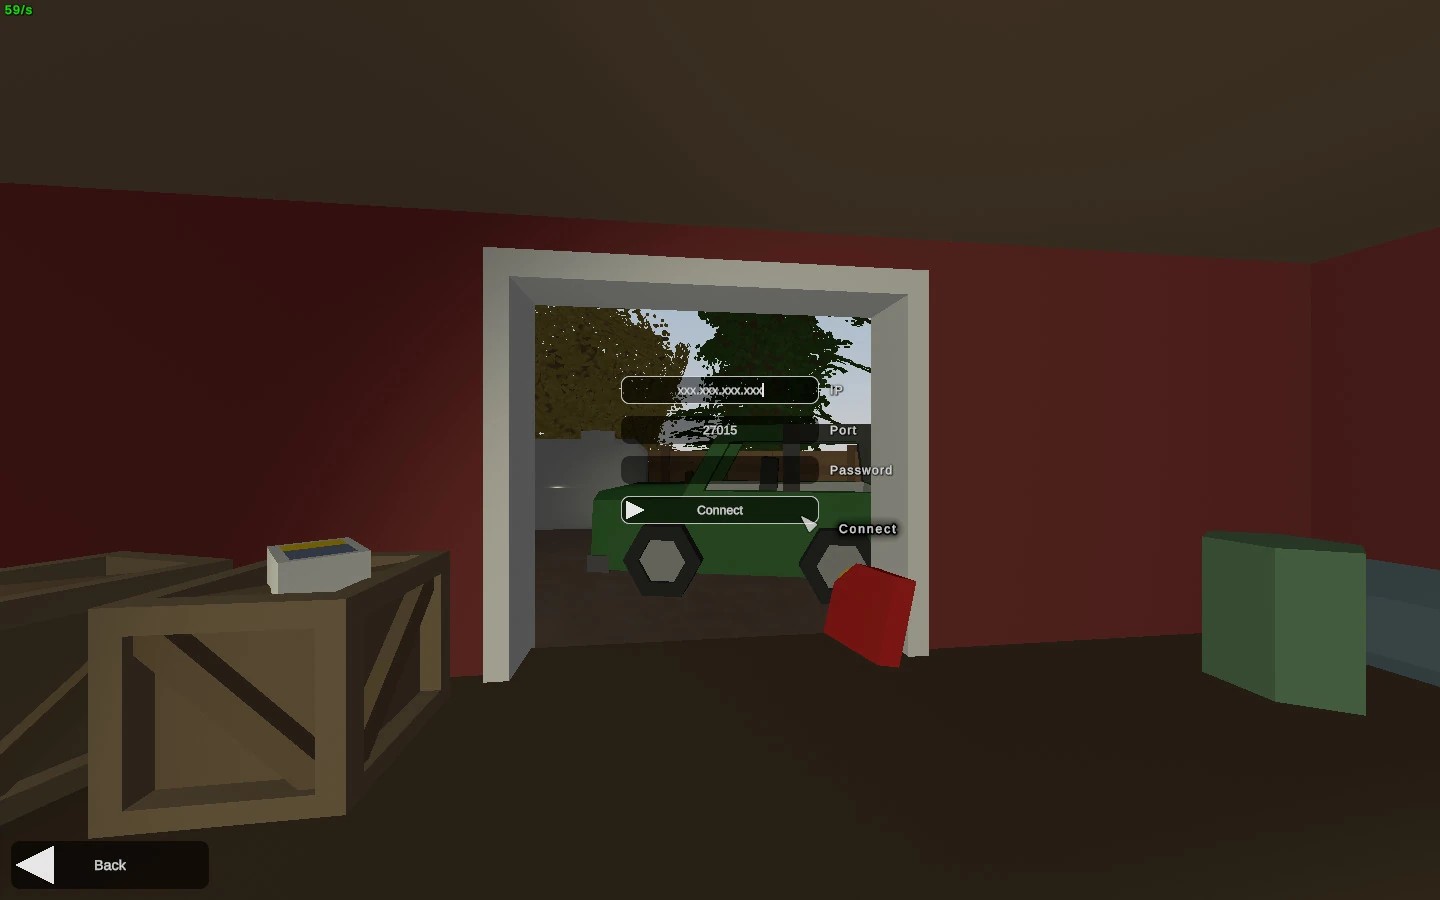 The Unturned server connect dialog